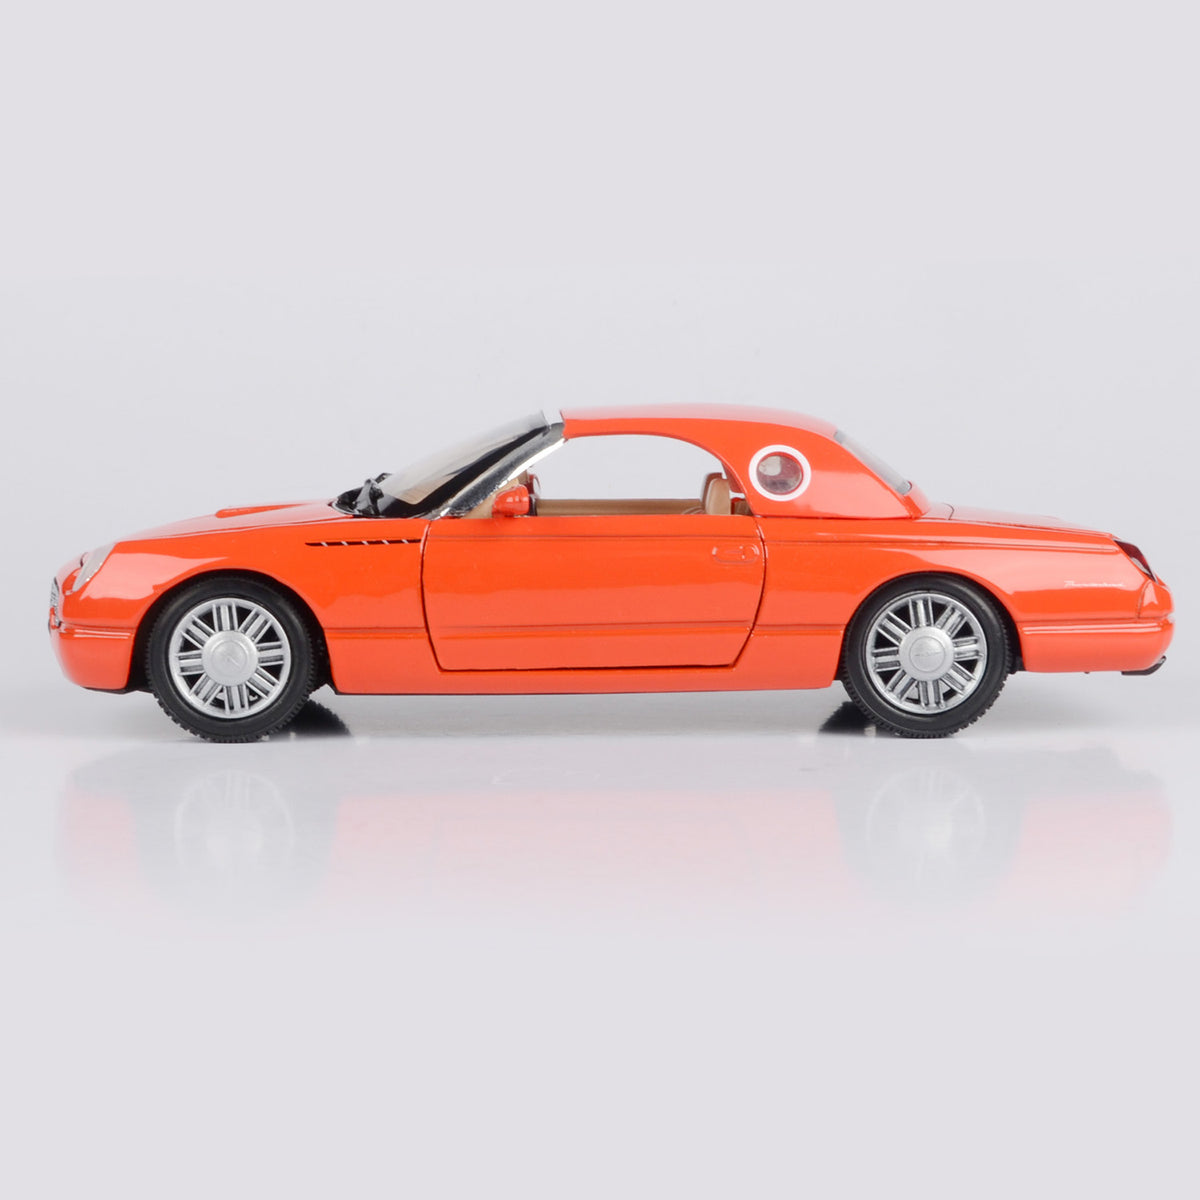 James Bond Ford Thunderbird Model Car - Die Another Day Edition - By Motormax